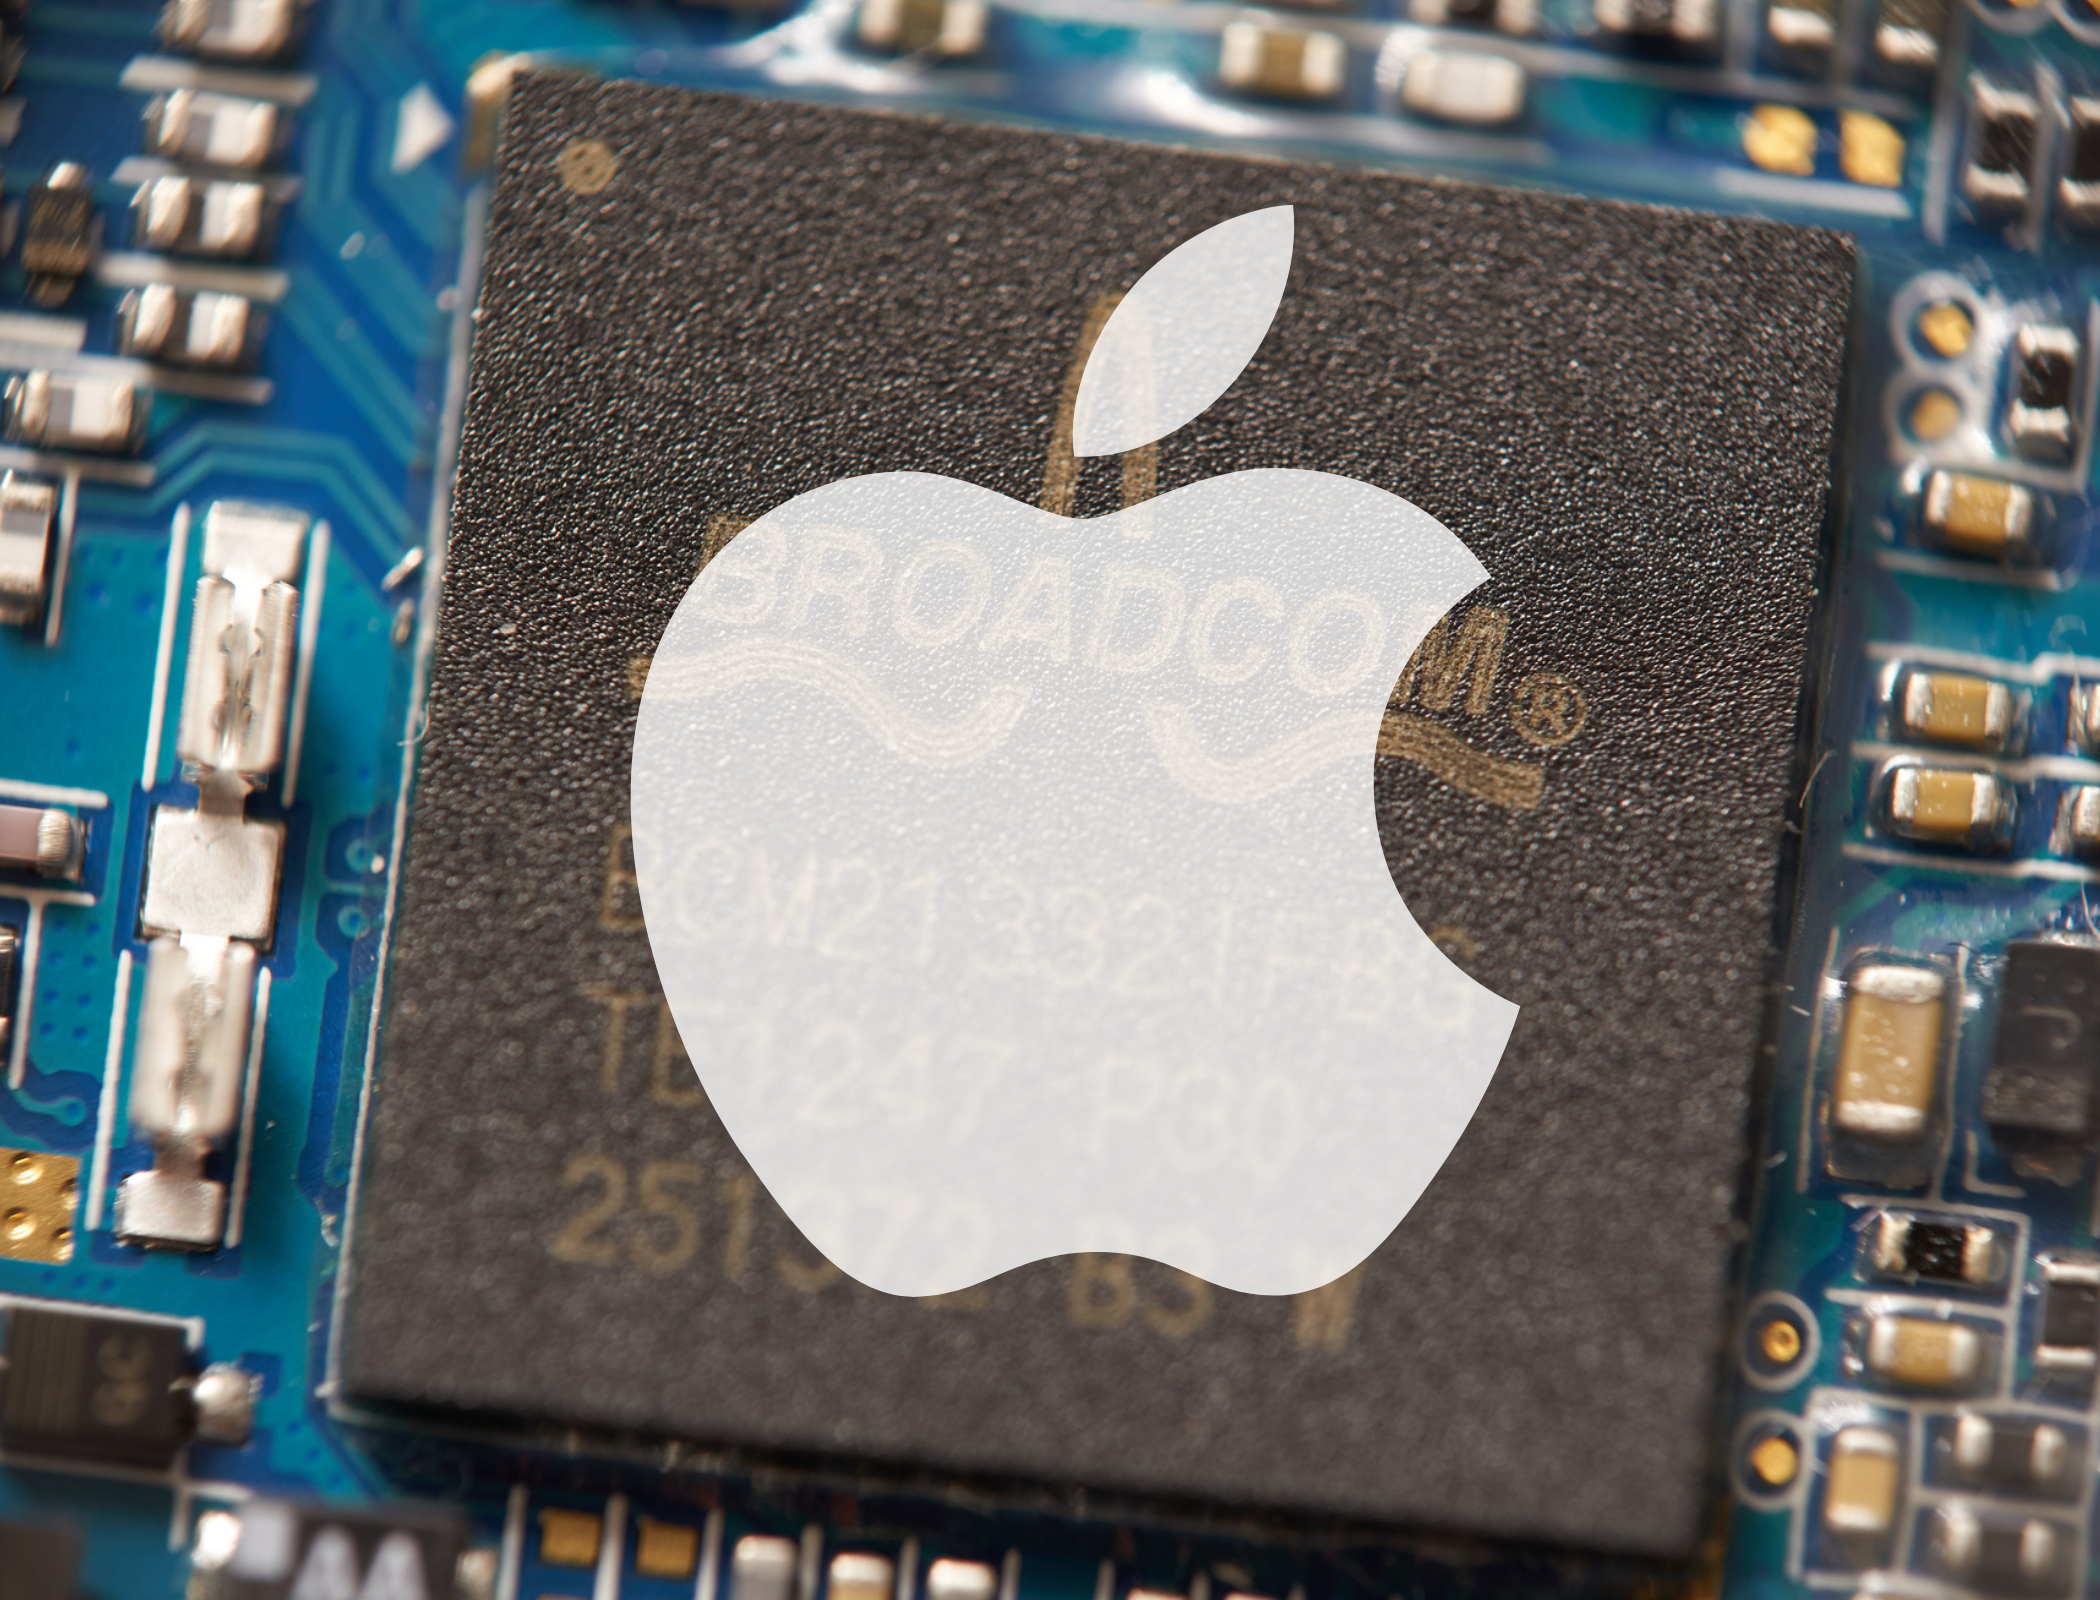 Apple to invest billions in US semiconductors